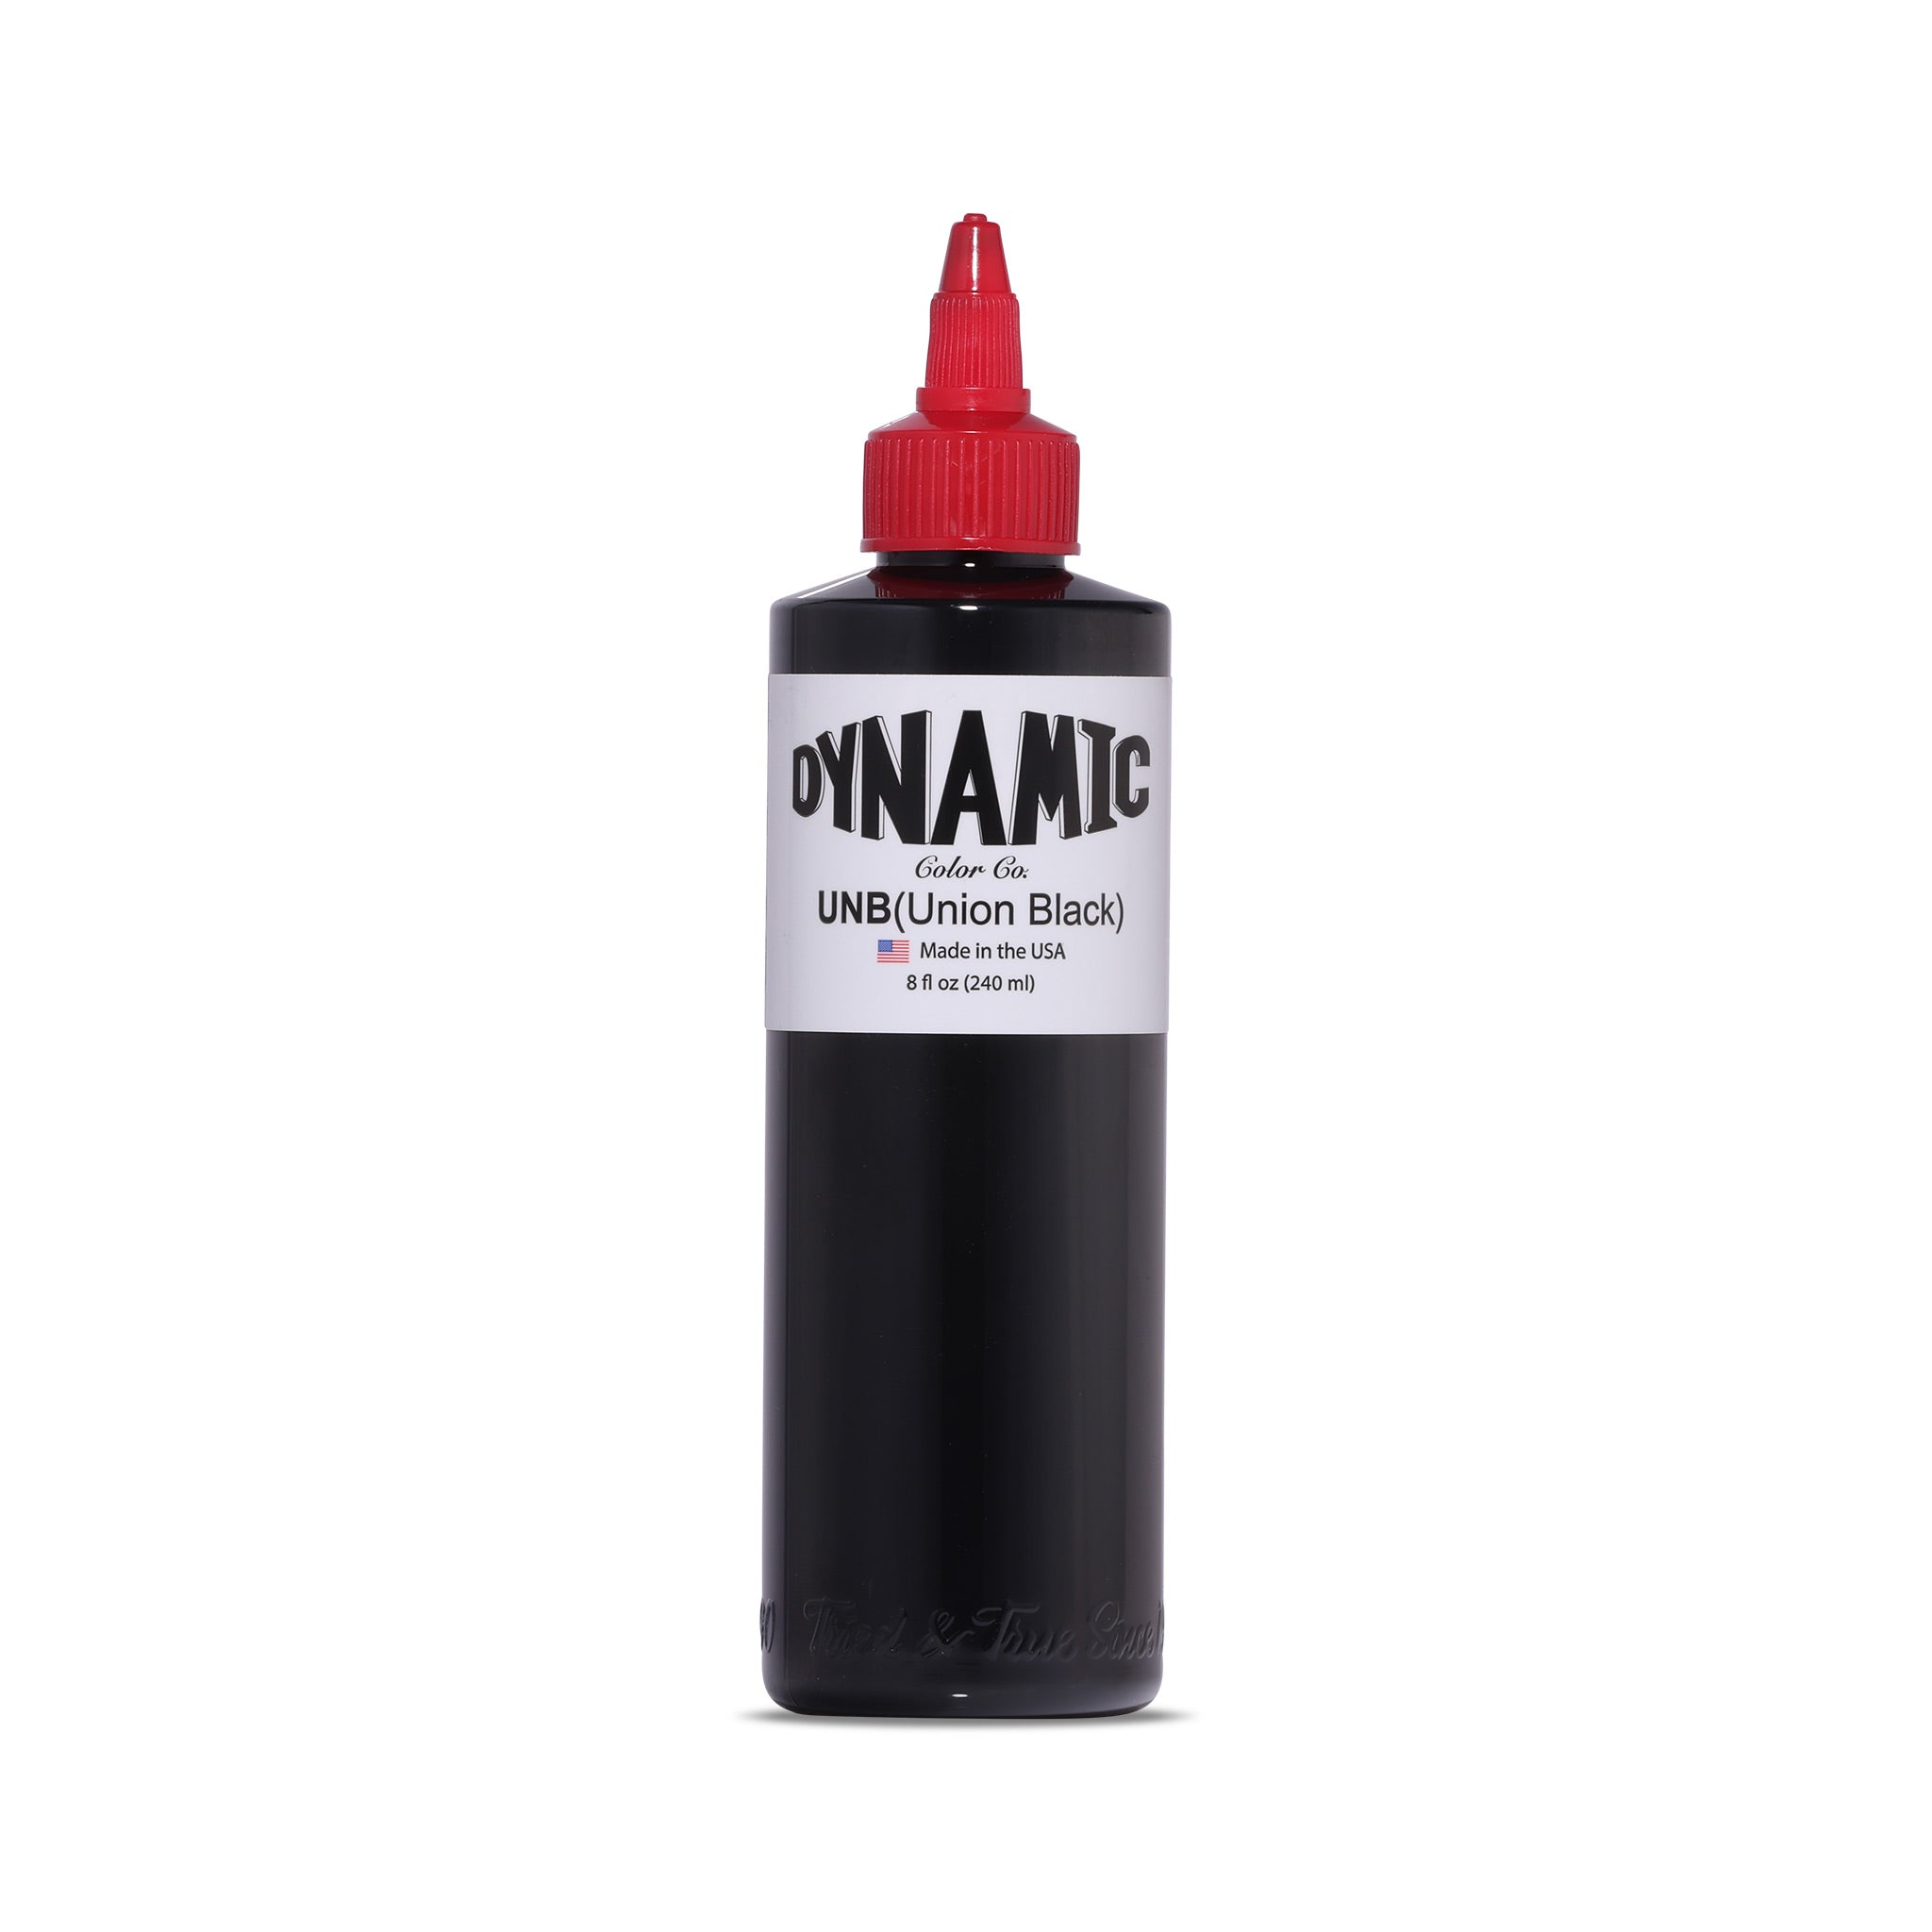 Dynamic Color EU Tattoo Inks | The best Ink for Tattoo Artists